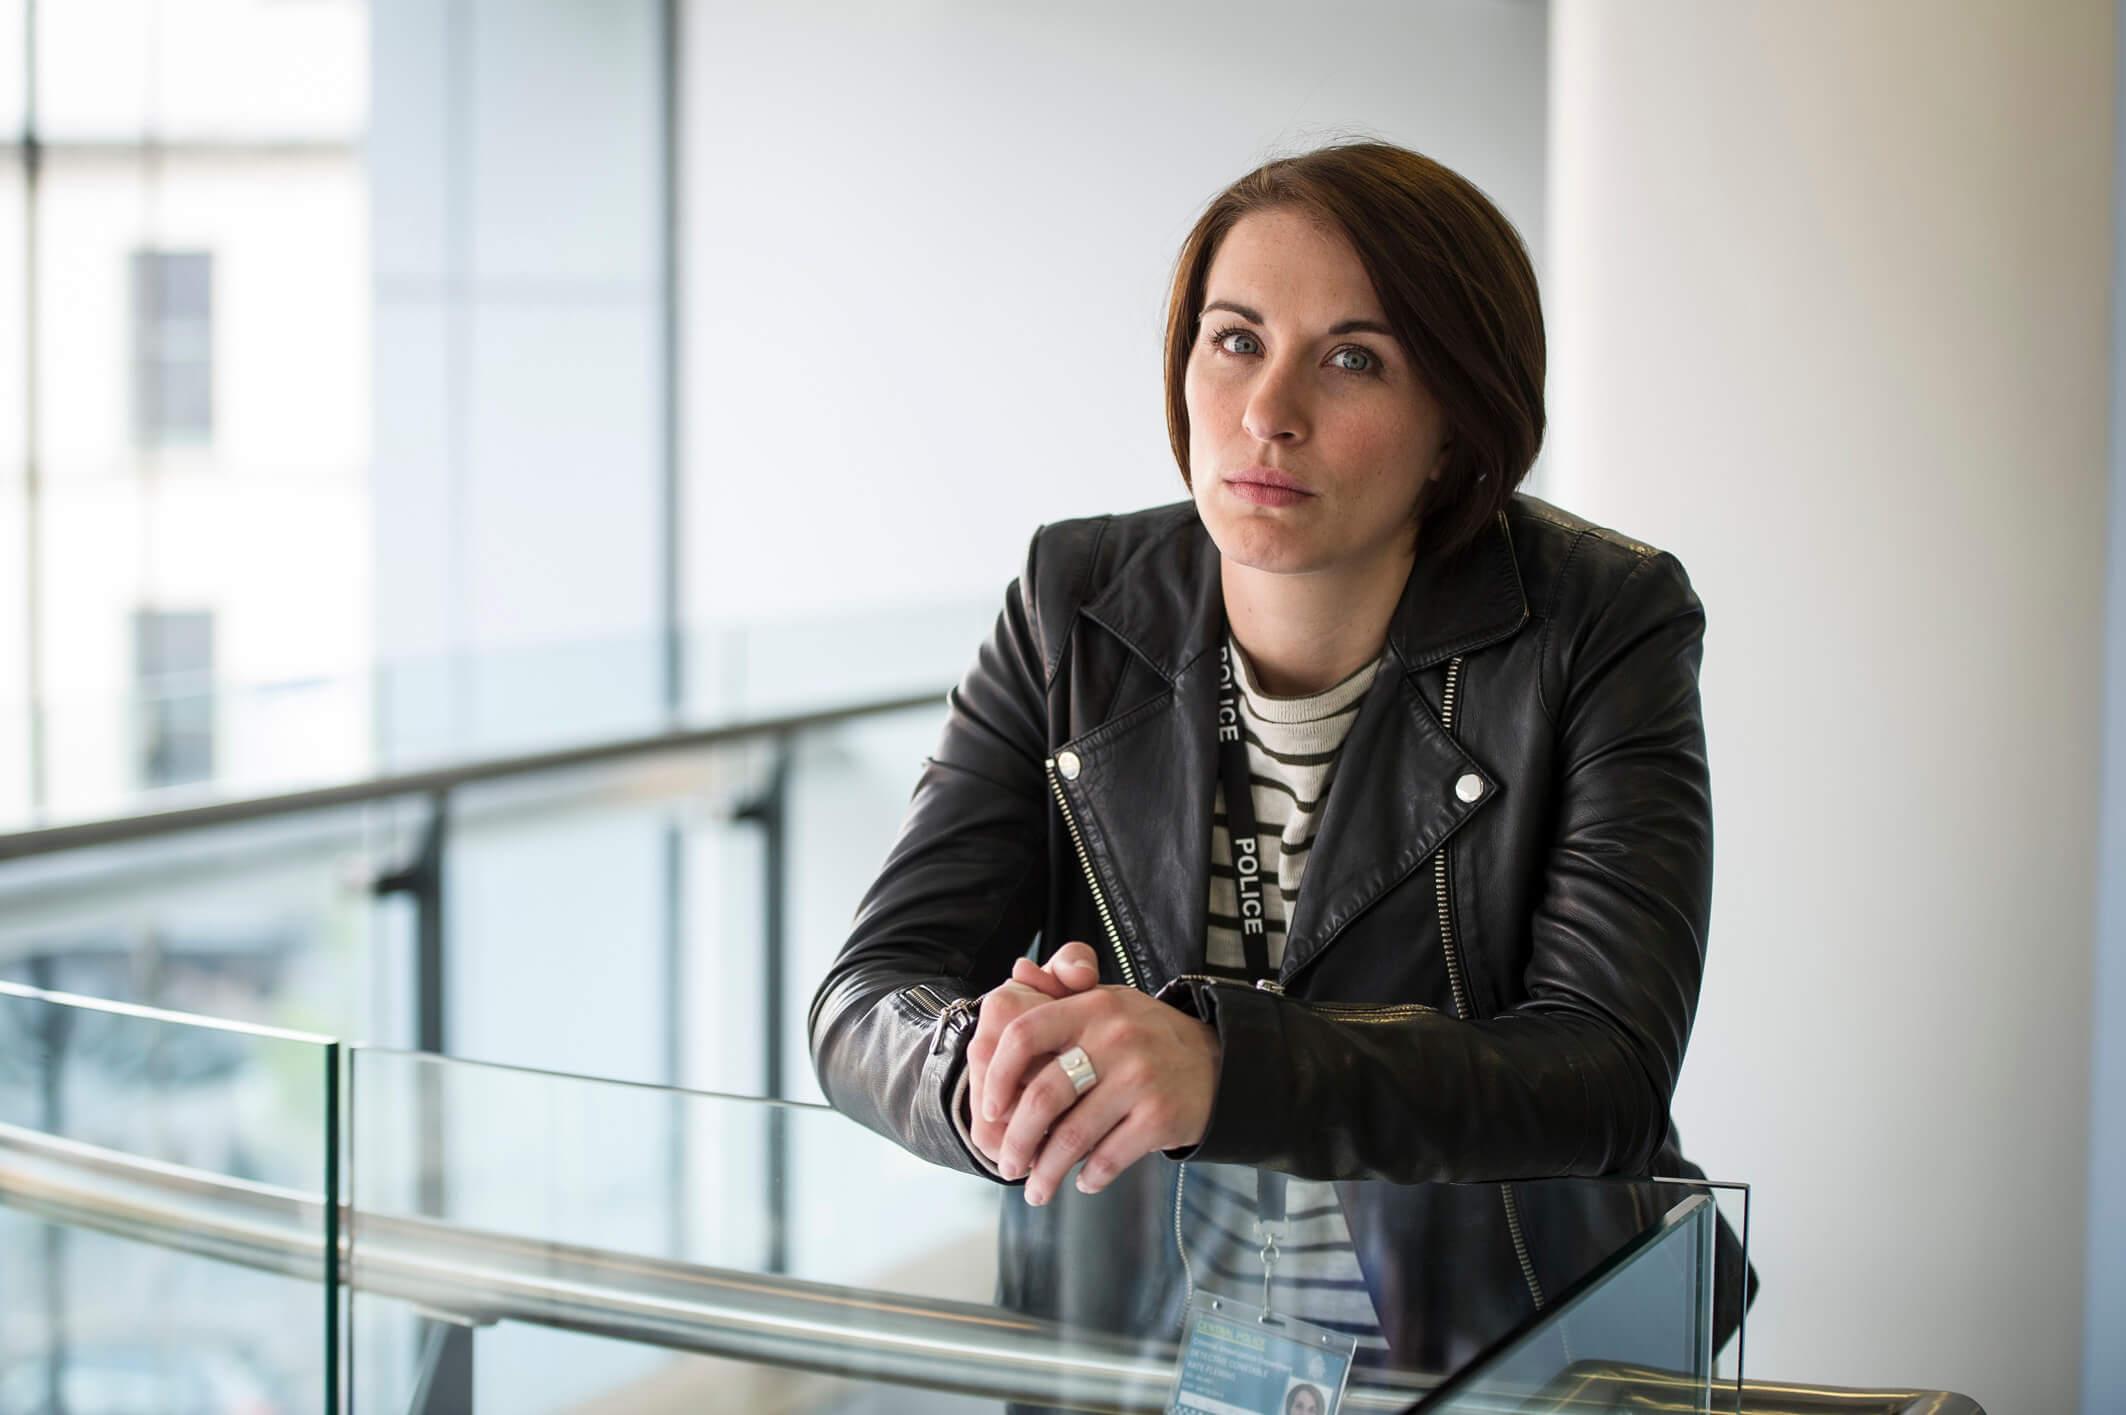 49 Hot Pictures Of Vicky McClure Which Will Make Your Day | Best Of Comic Books